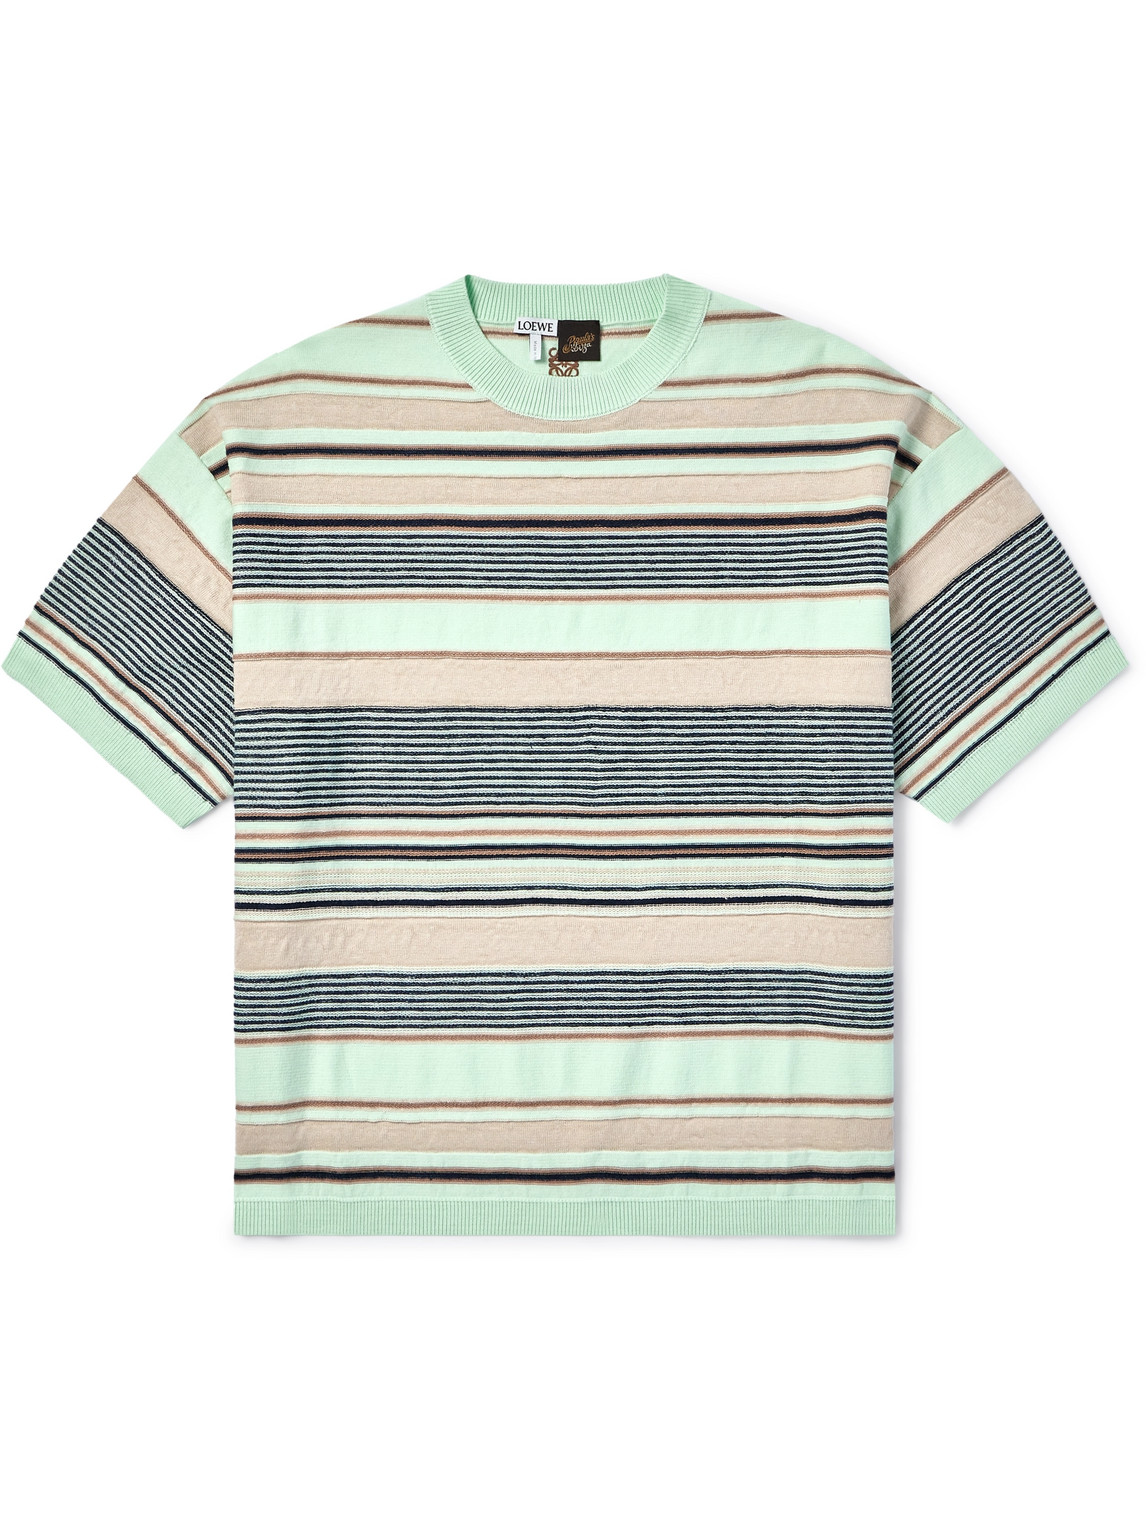 Loewe Paula's Ibiza Striped Cotton And Linen-blend T-shirt In White